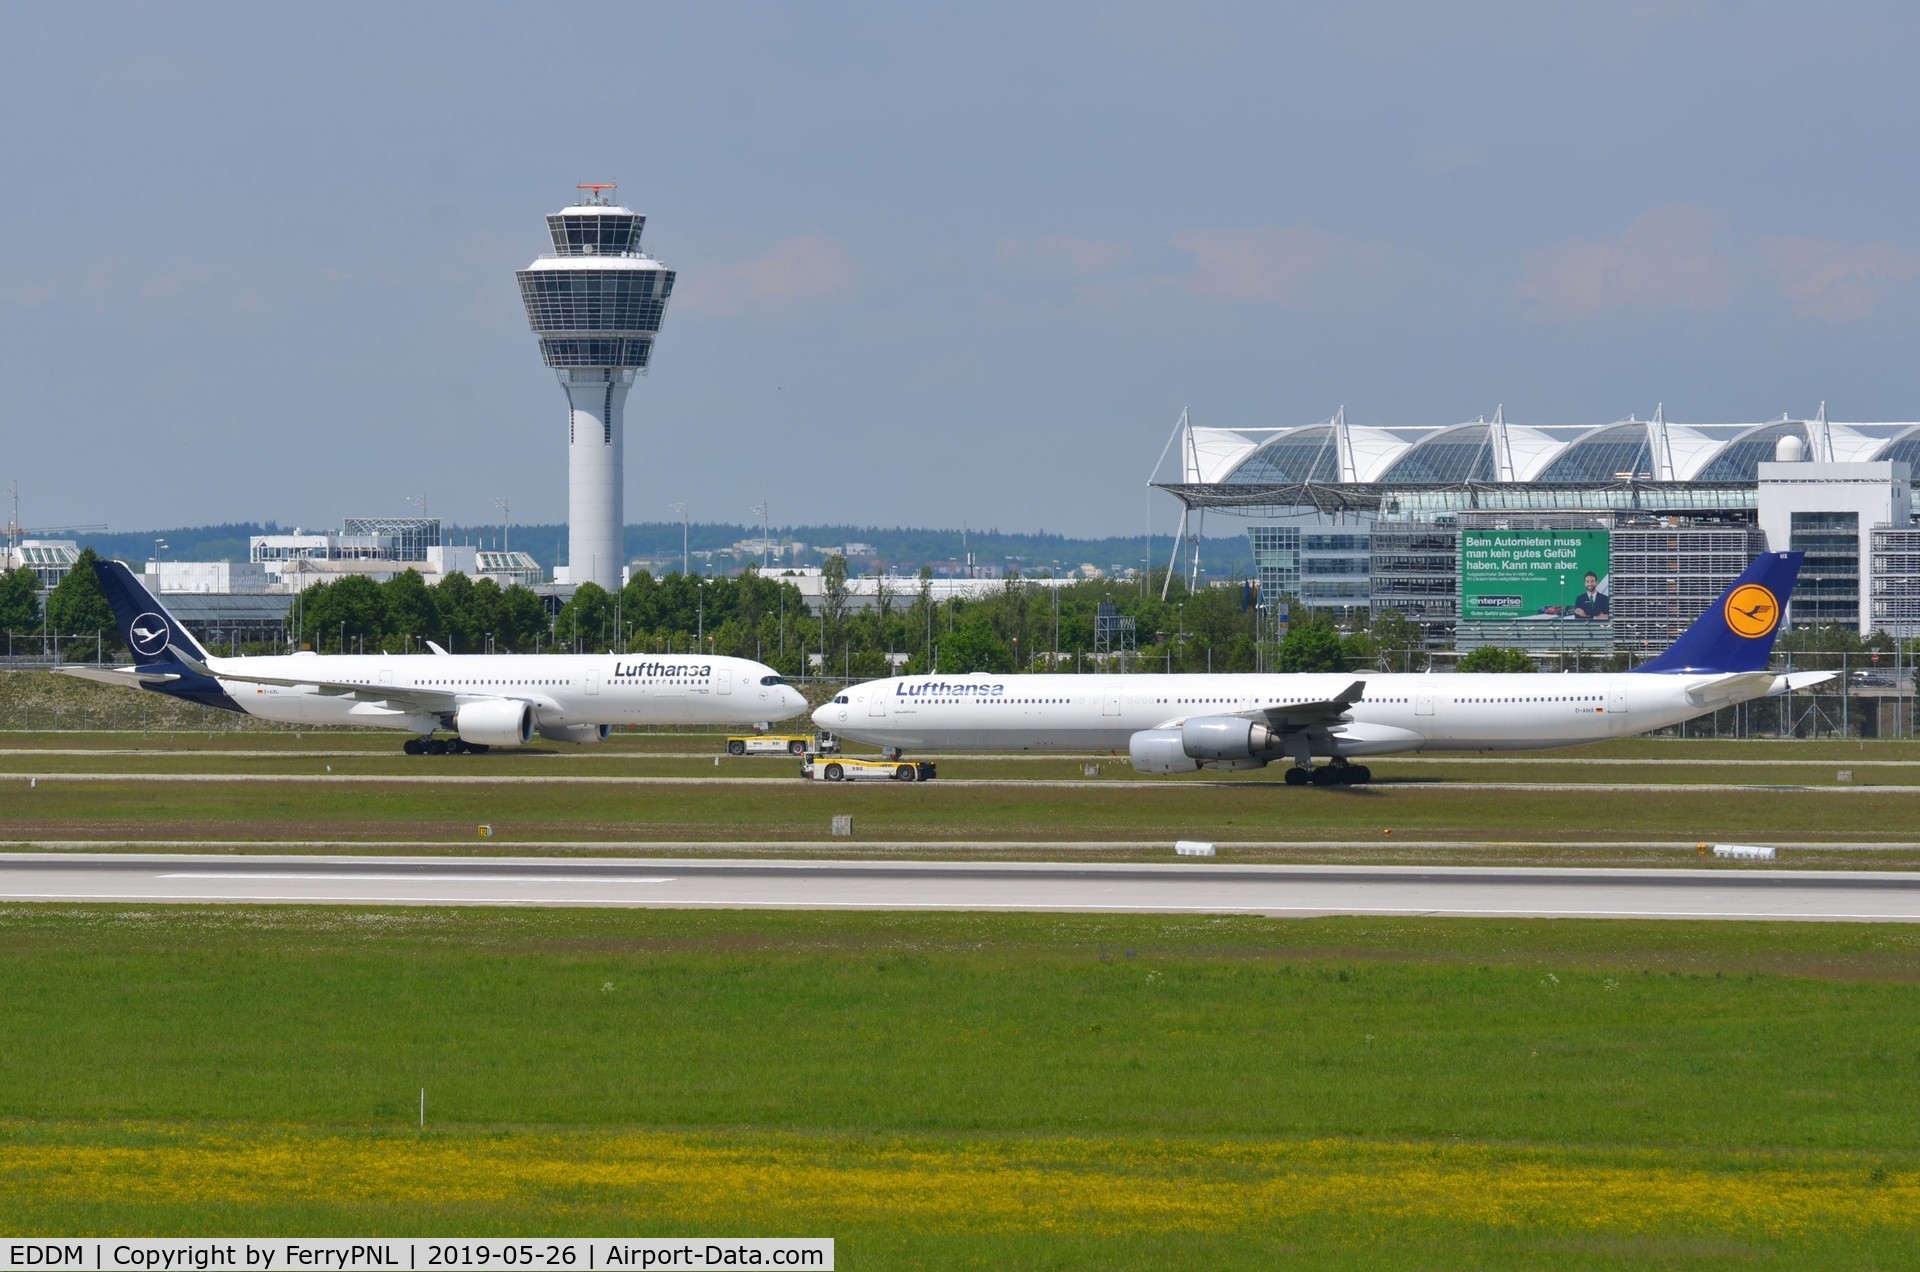 Munich International Airport (Franz Josef Strauß International Airport), Munich Germany (EDDM) - Munchen Airport, tower and part of the terminal and runway in front of the taxyways. View from spotting mount.